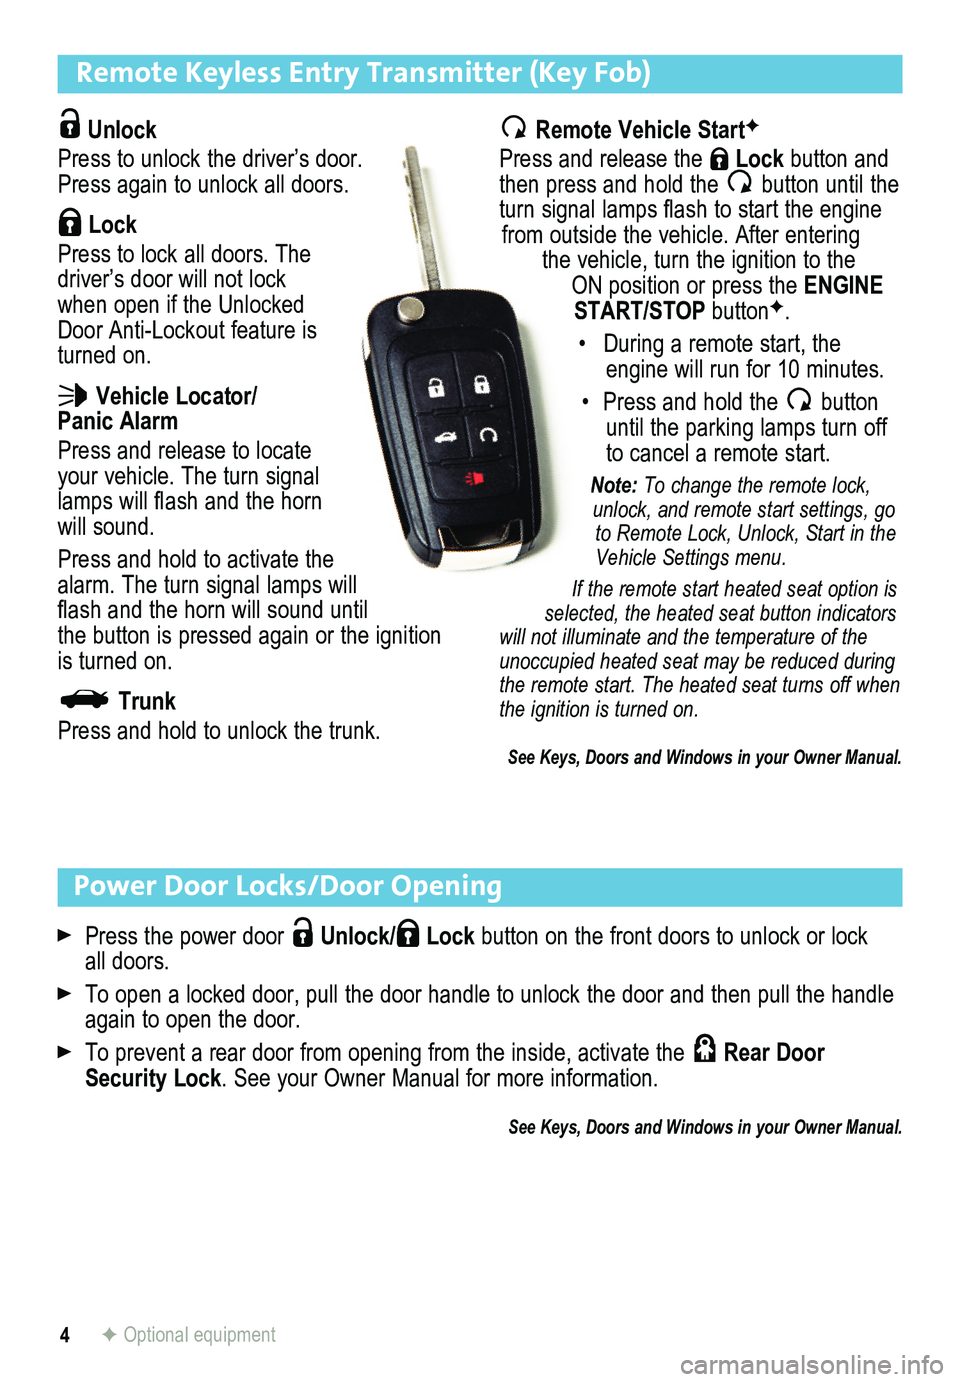 BUICK REGAL 2014  Get To Know Guide 4
Remote Keyless Entry Transmitter (Key Fob) 
 Unlock 
Press to unlock the driver’s door. Press again to unlock all doors.
 Lock 
Press to lock all doors. The driver’s door will not lock when open